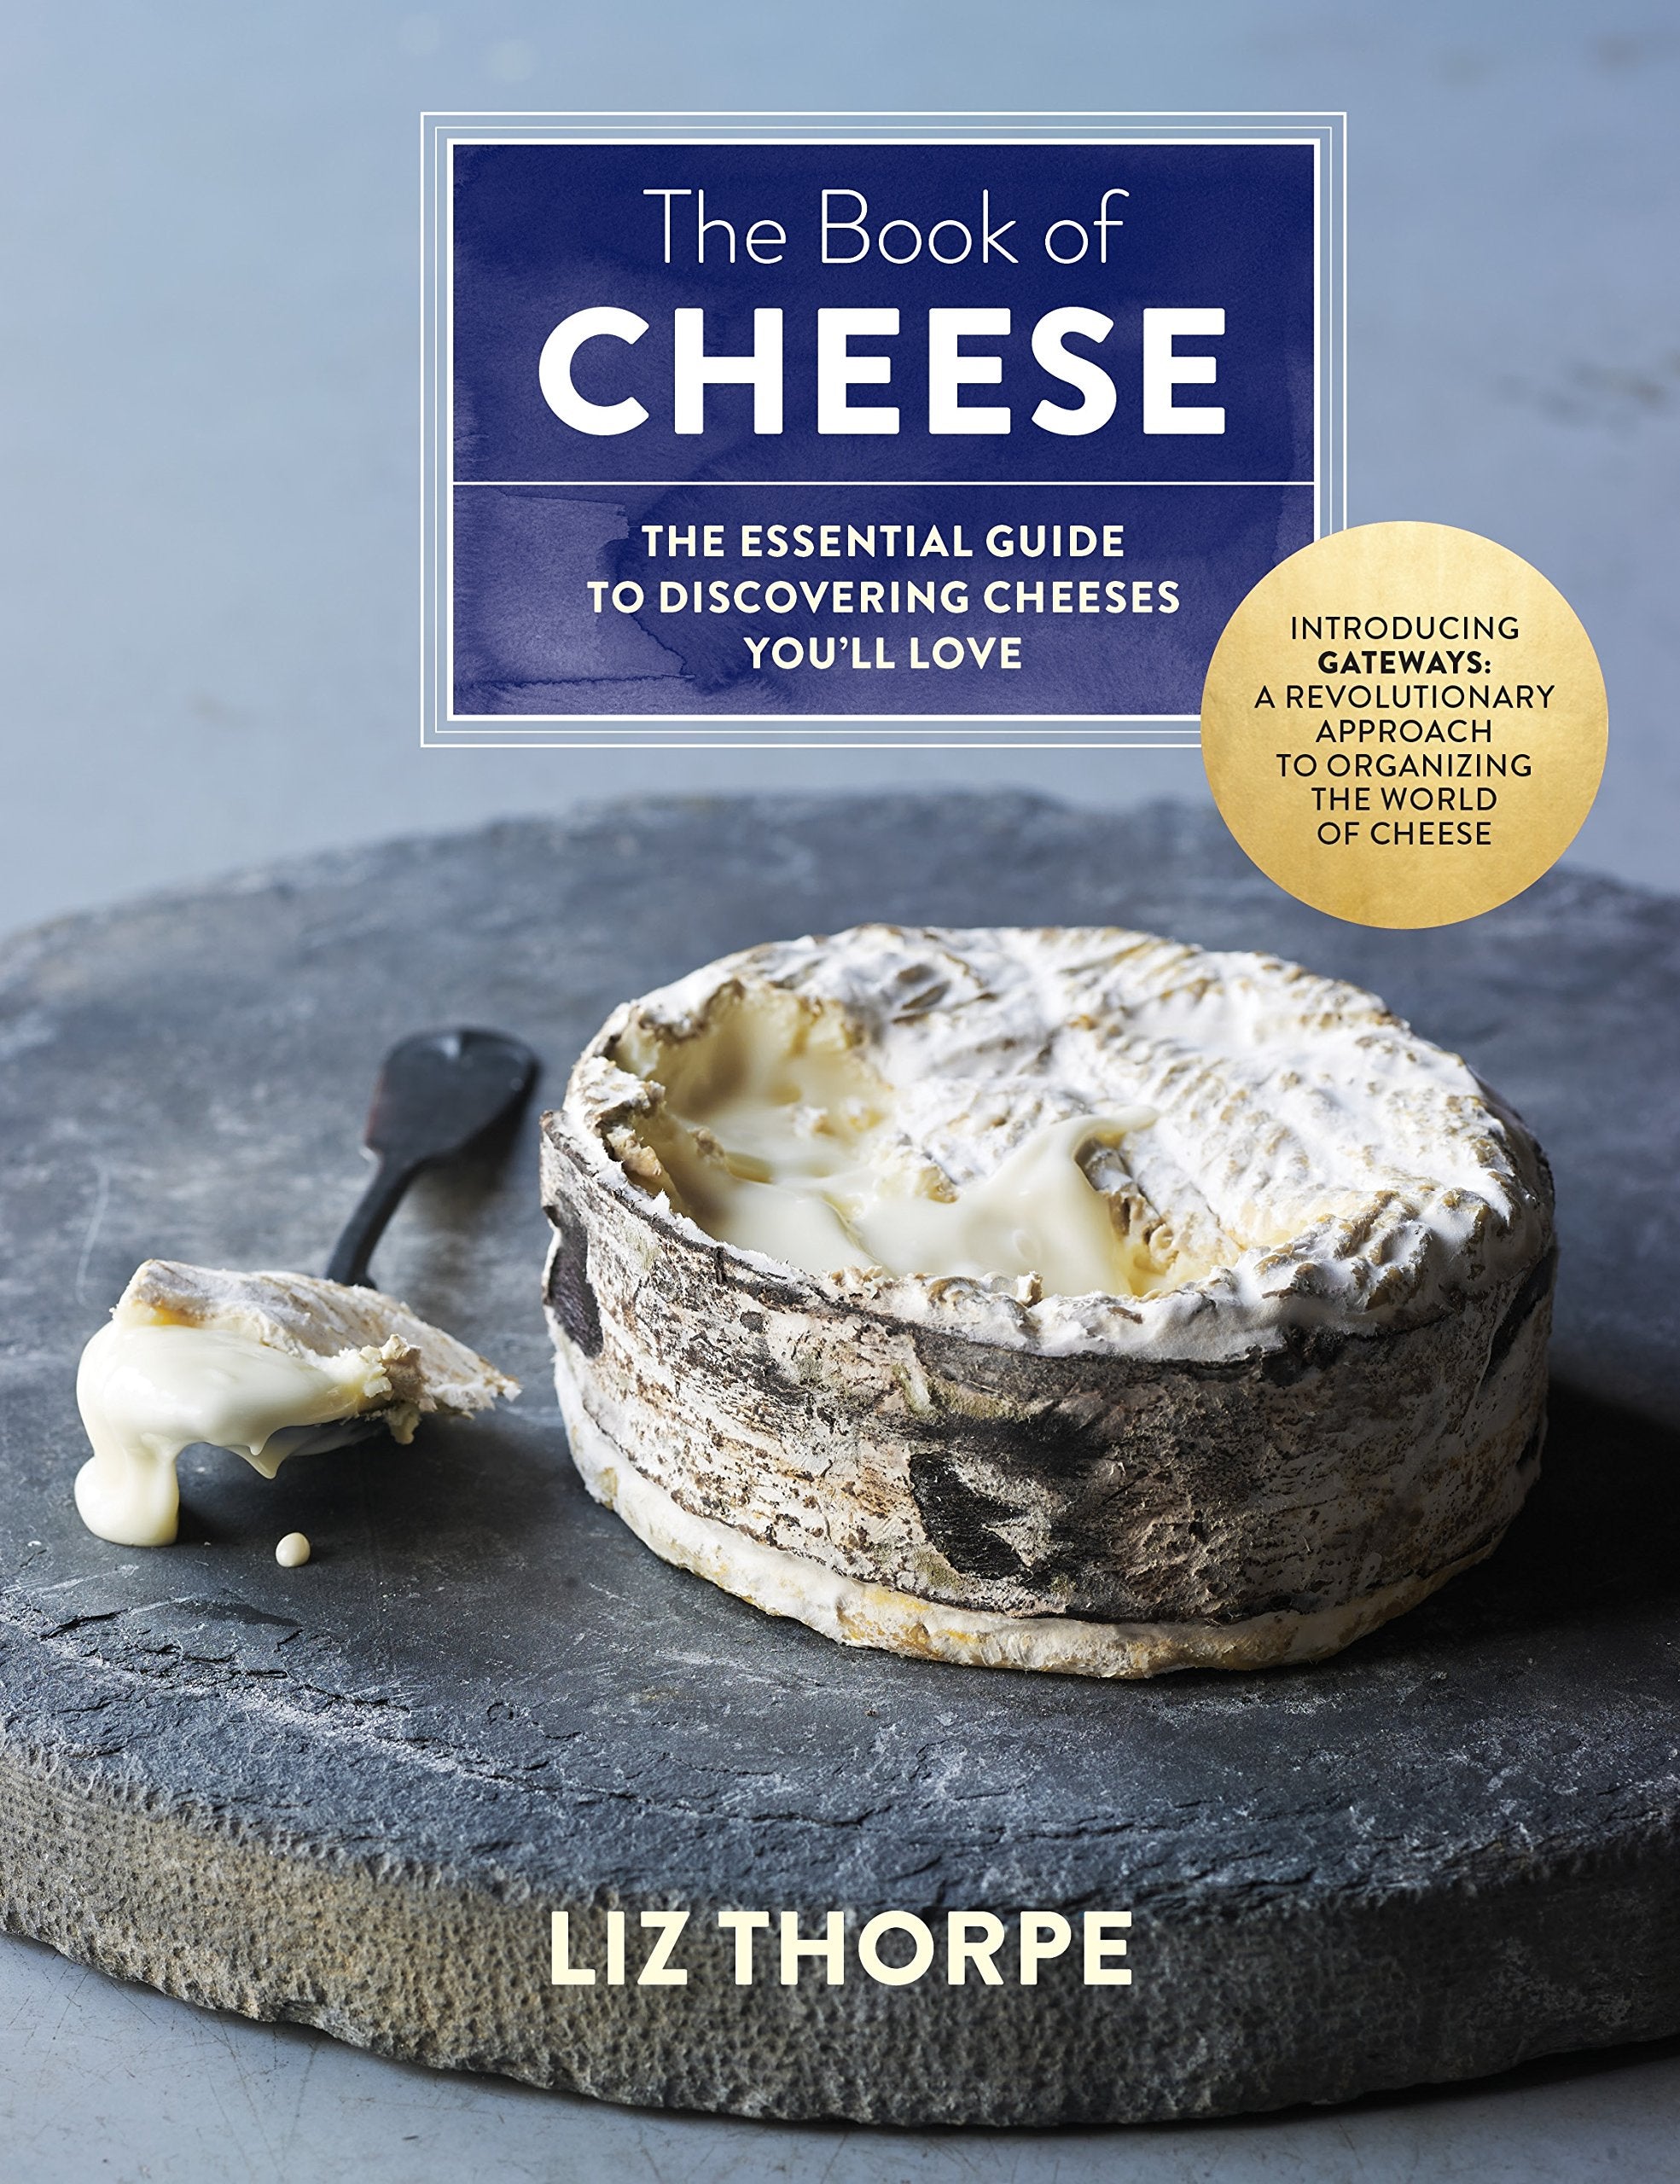 The Book of Cheese: The Essential Guide to Discovering Cheeses You'll Love (Liz Thorpe)